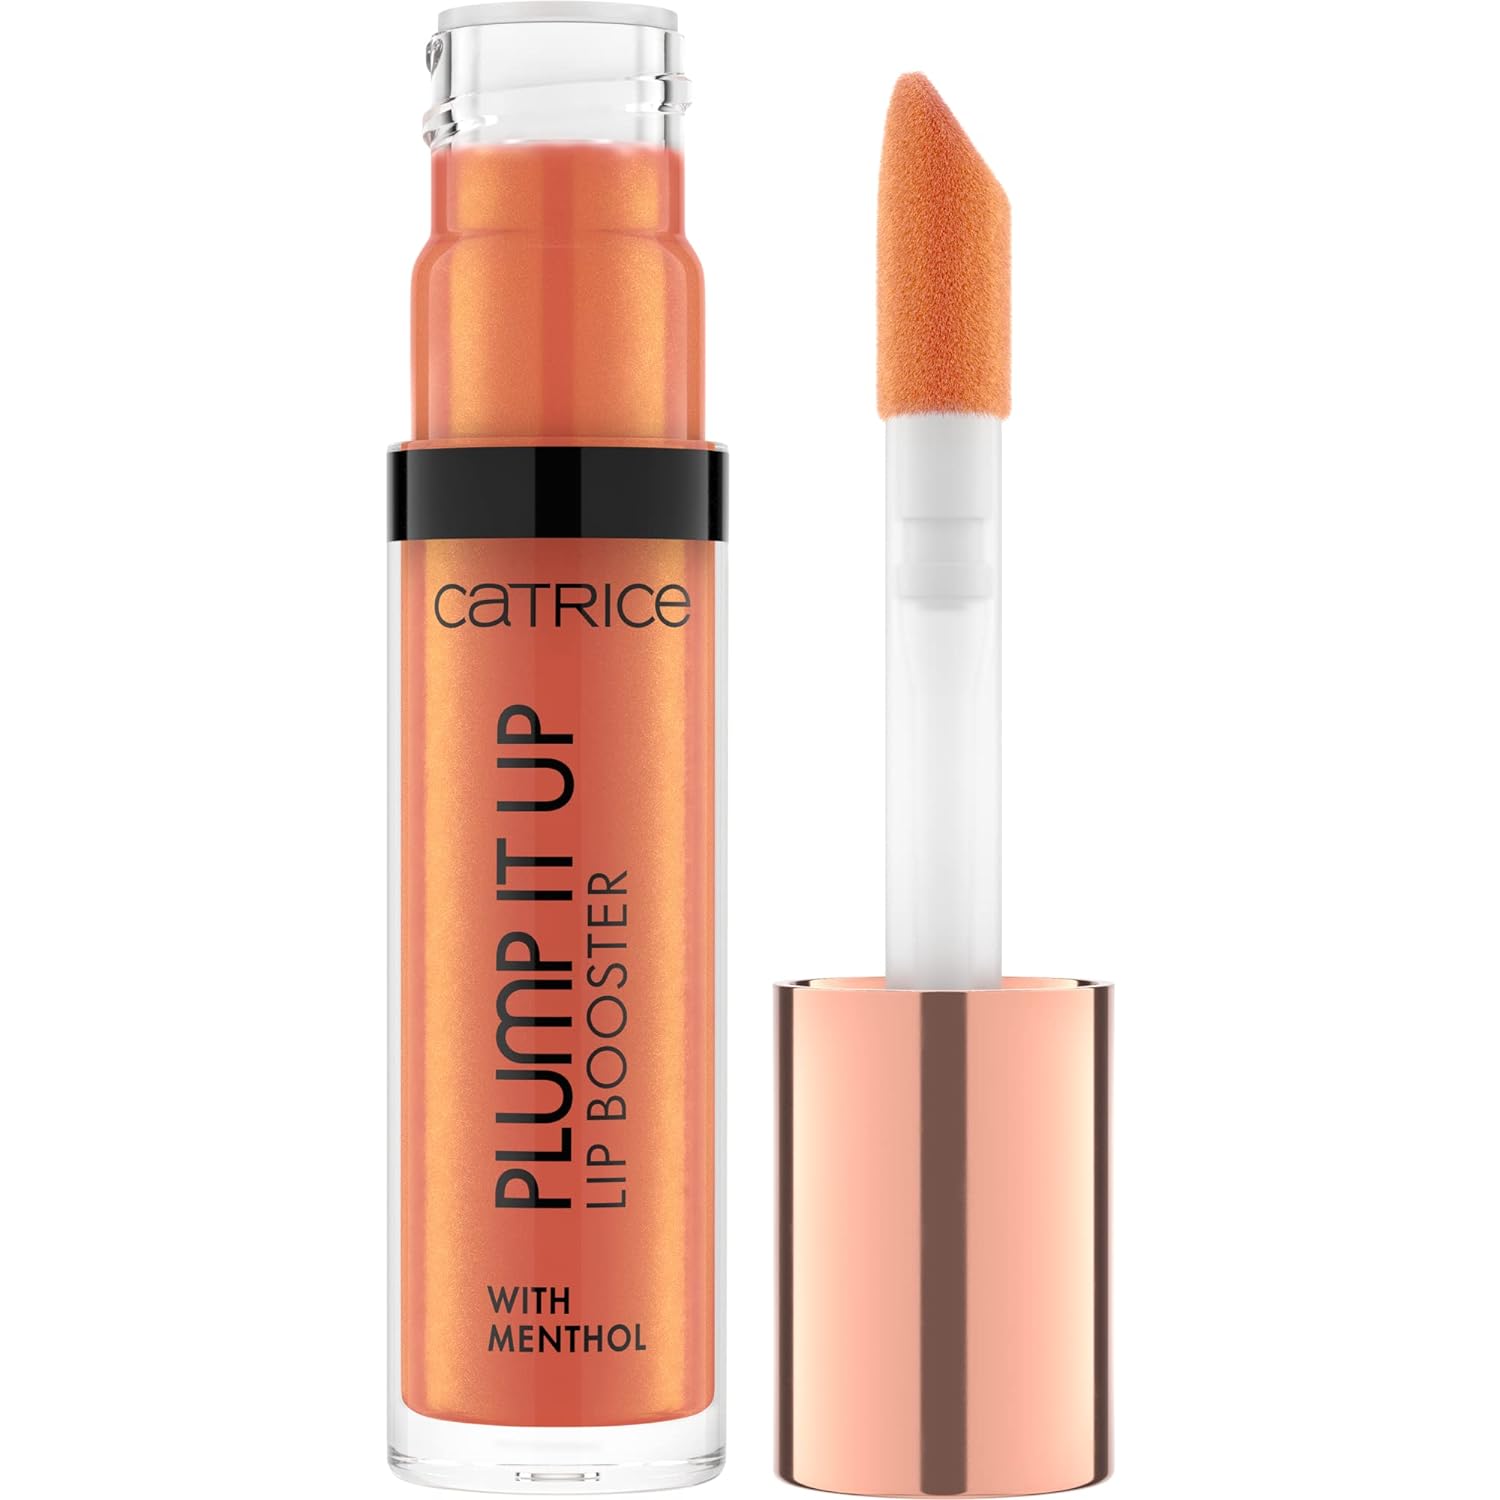 Catrice Plump IT Up Lip Booster, Lip Gloss, No. 070 fake it till you make it, gold, cooling, coloring effect, adds volume, glossy, metallic, vegan, alcohol free, 3.5 ml